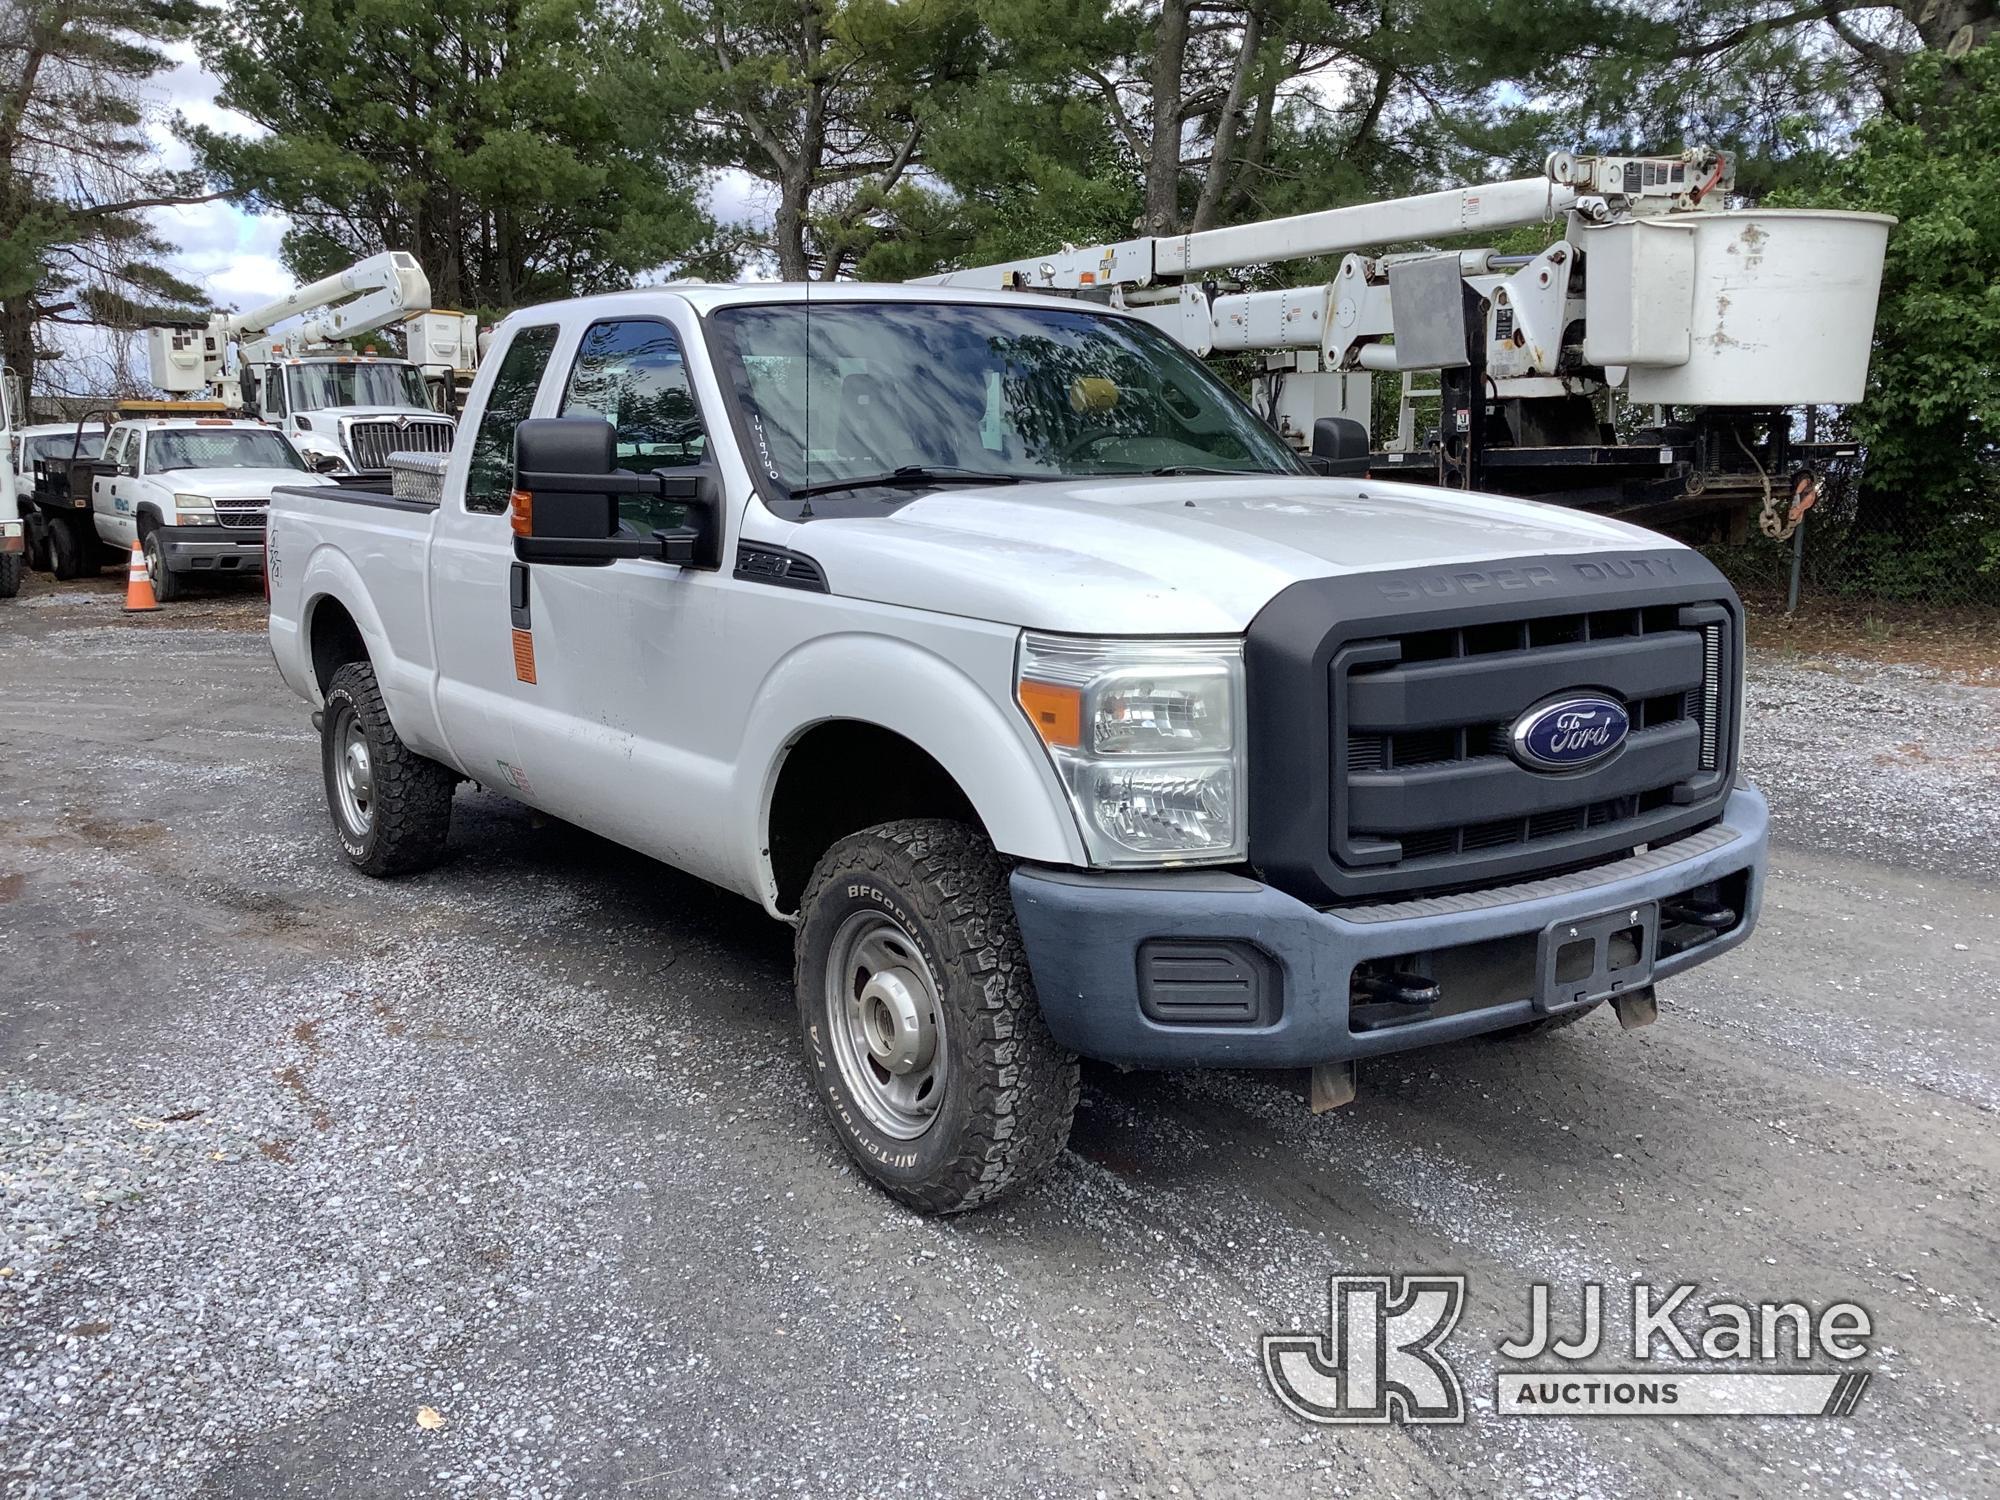 (Frederick, MD) 2014 Ford F250 4x4 Extended-Cab Pickup Truck Runs & Moves, Check Engine Light On, Tr